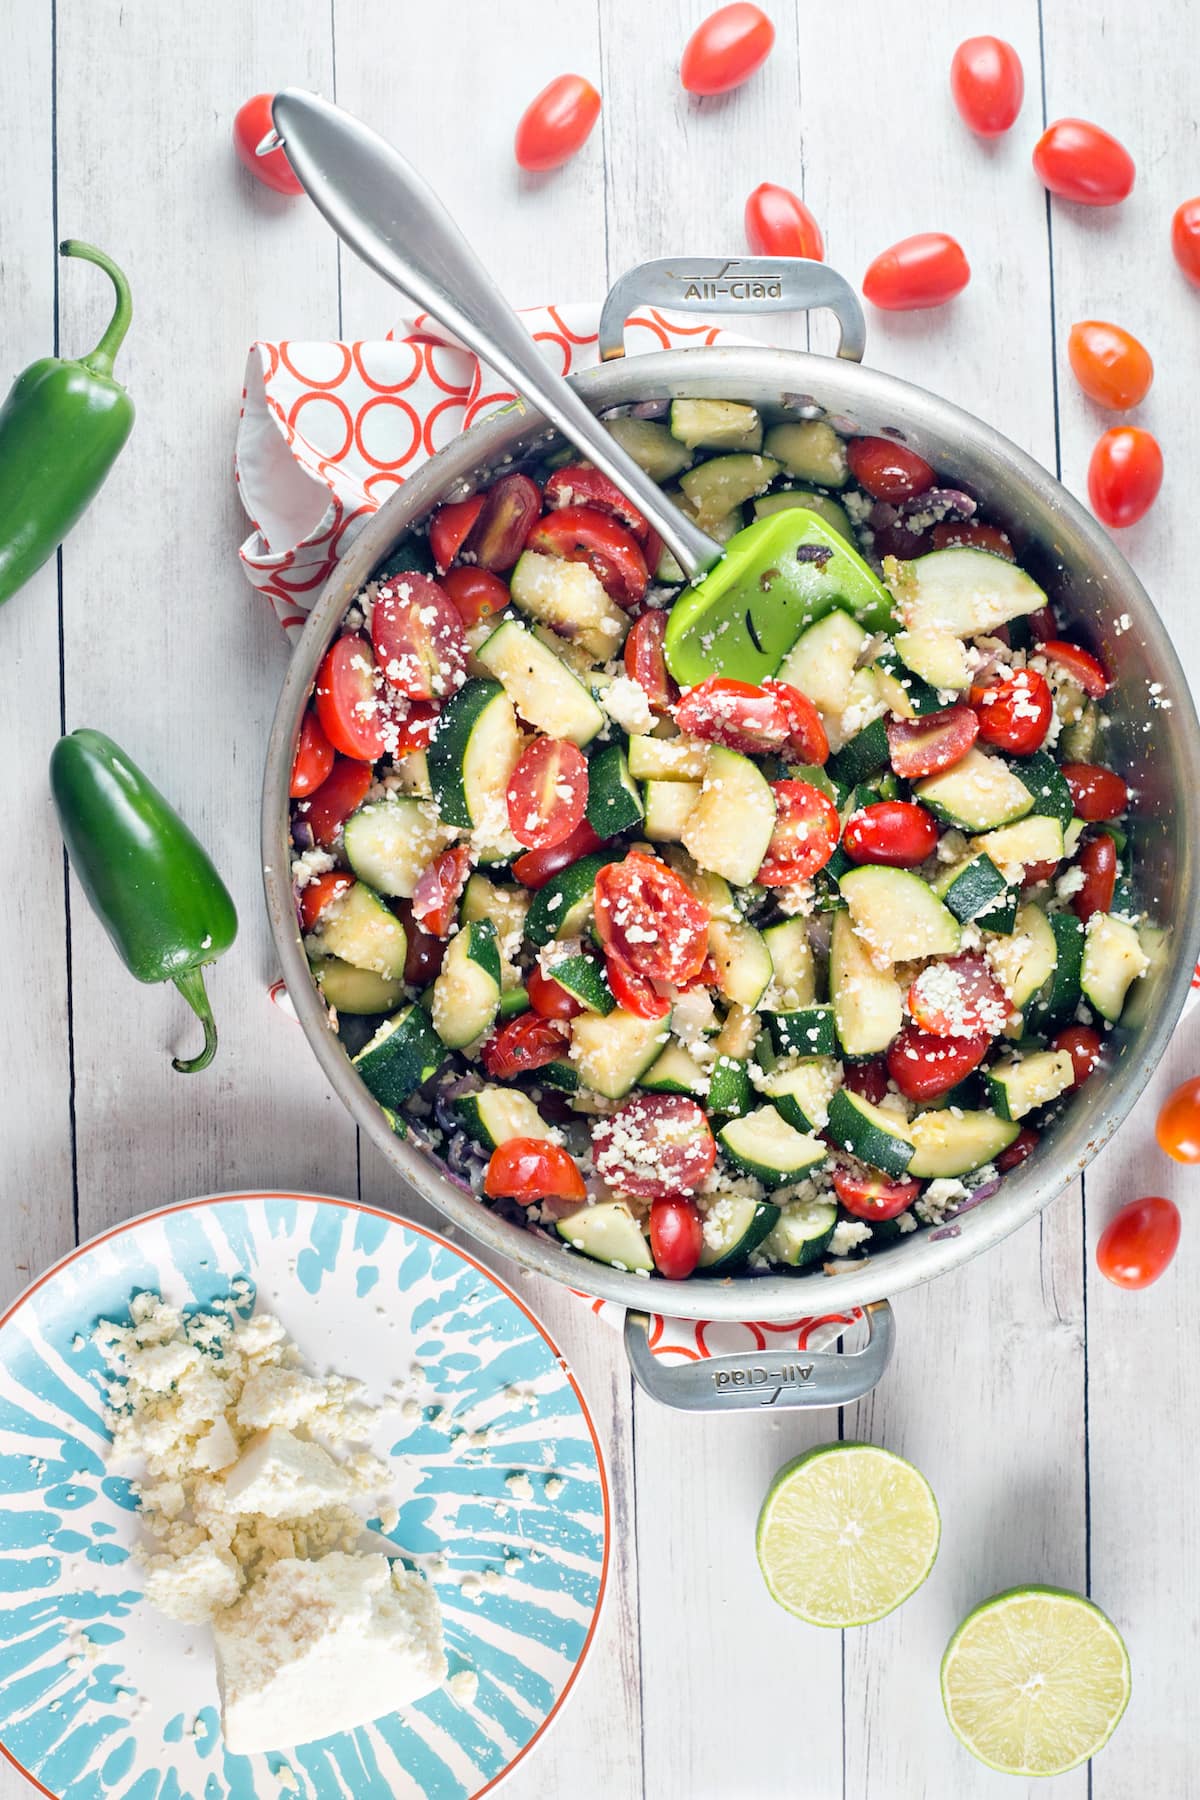 large skillet full of zucchini, tomatoes, and jalapenos